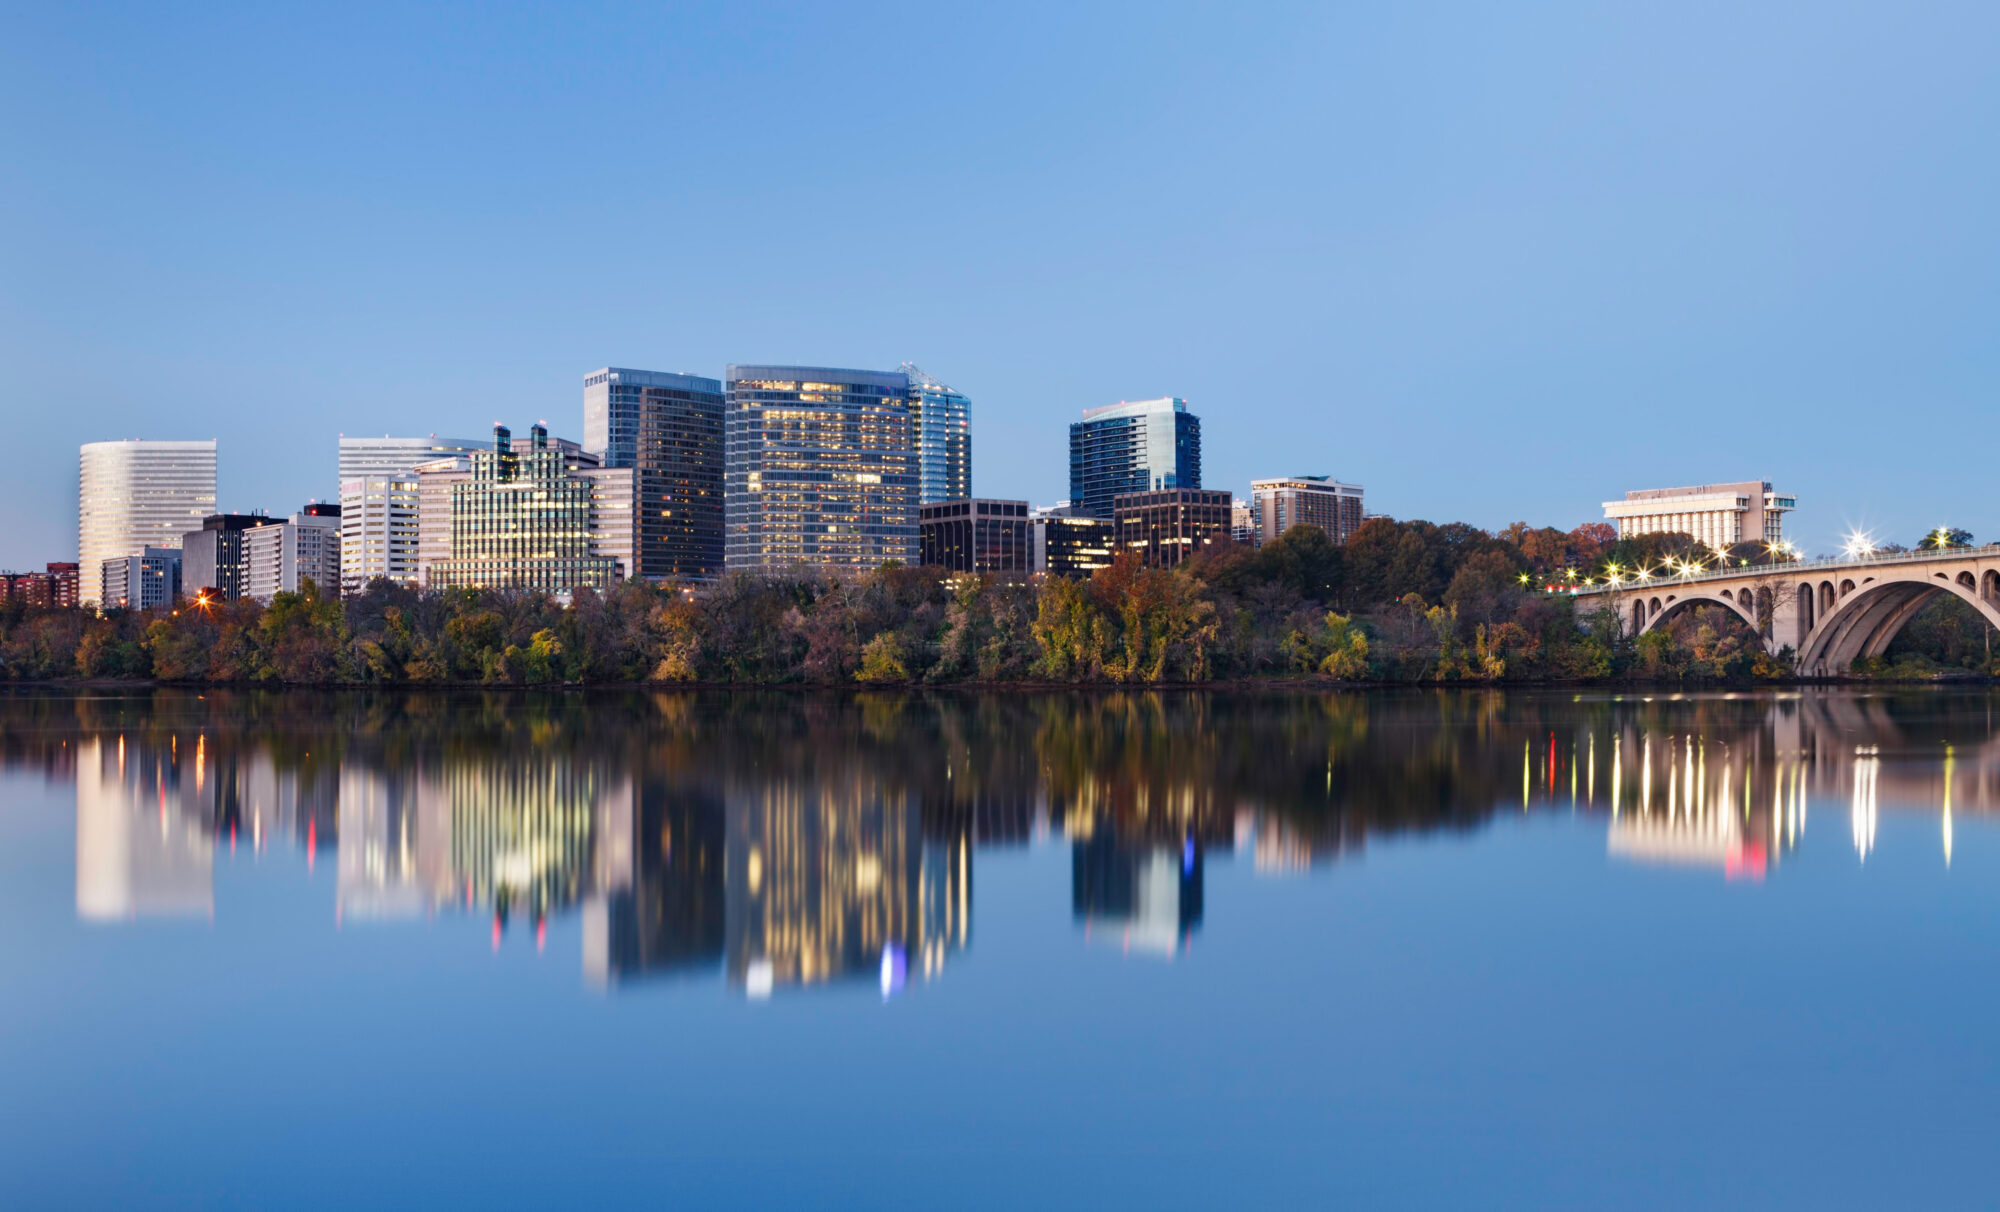 Skyline of Arlington Virginia from over the water